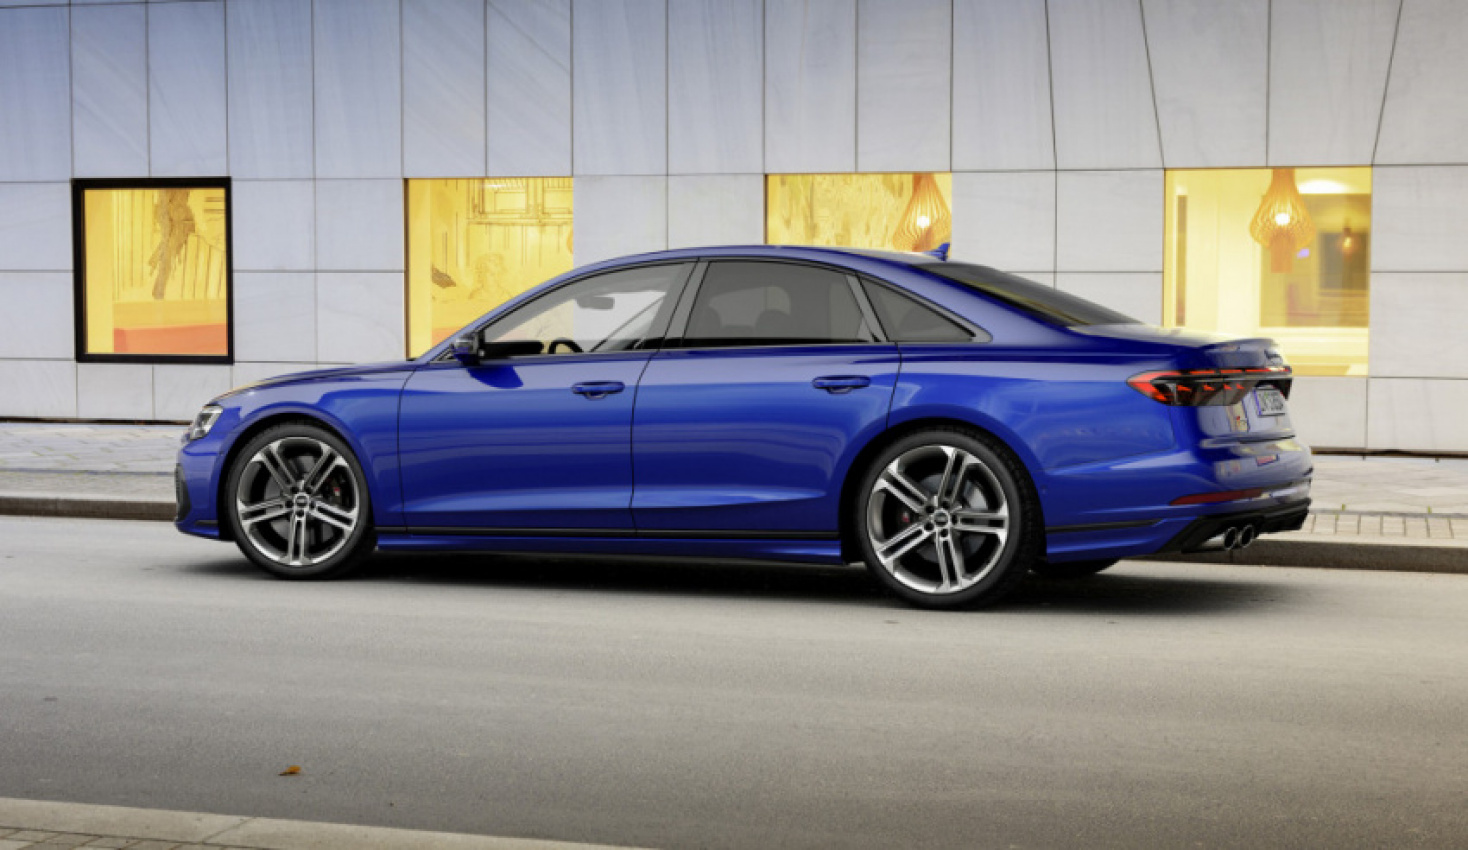 audi, autos, cars, audi a8, audi a8 news, audi news, luxury cars, sedans, videos, youtube, preview: 2022 audi a8 arrives with new styling, horch range-topper